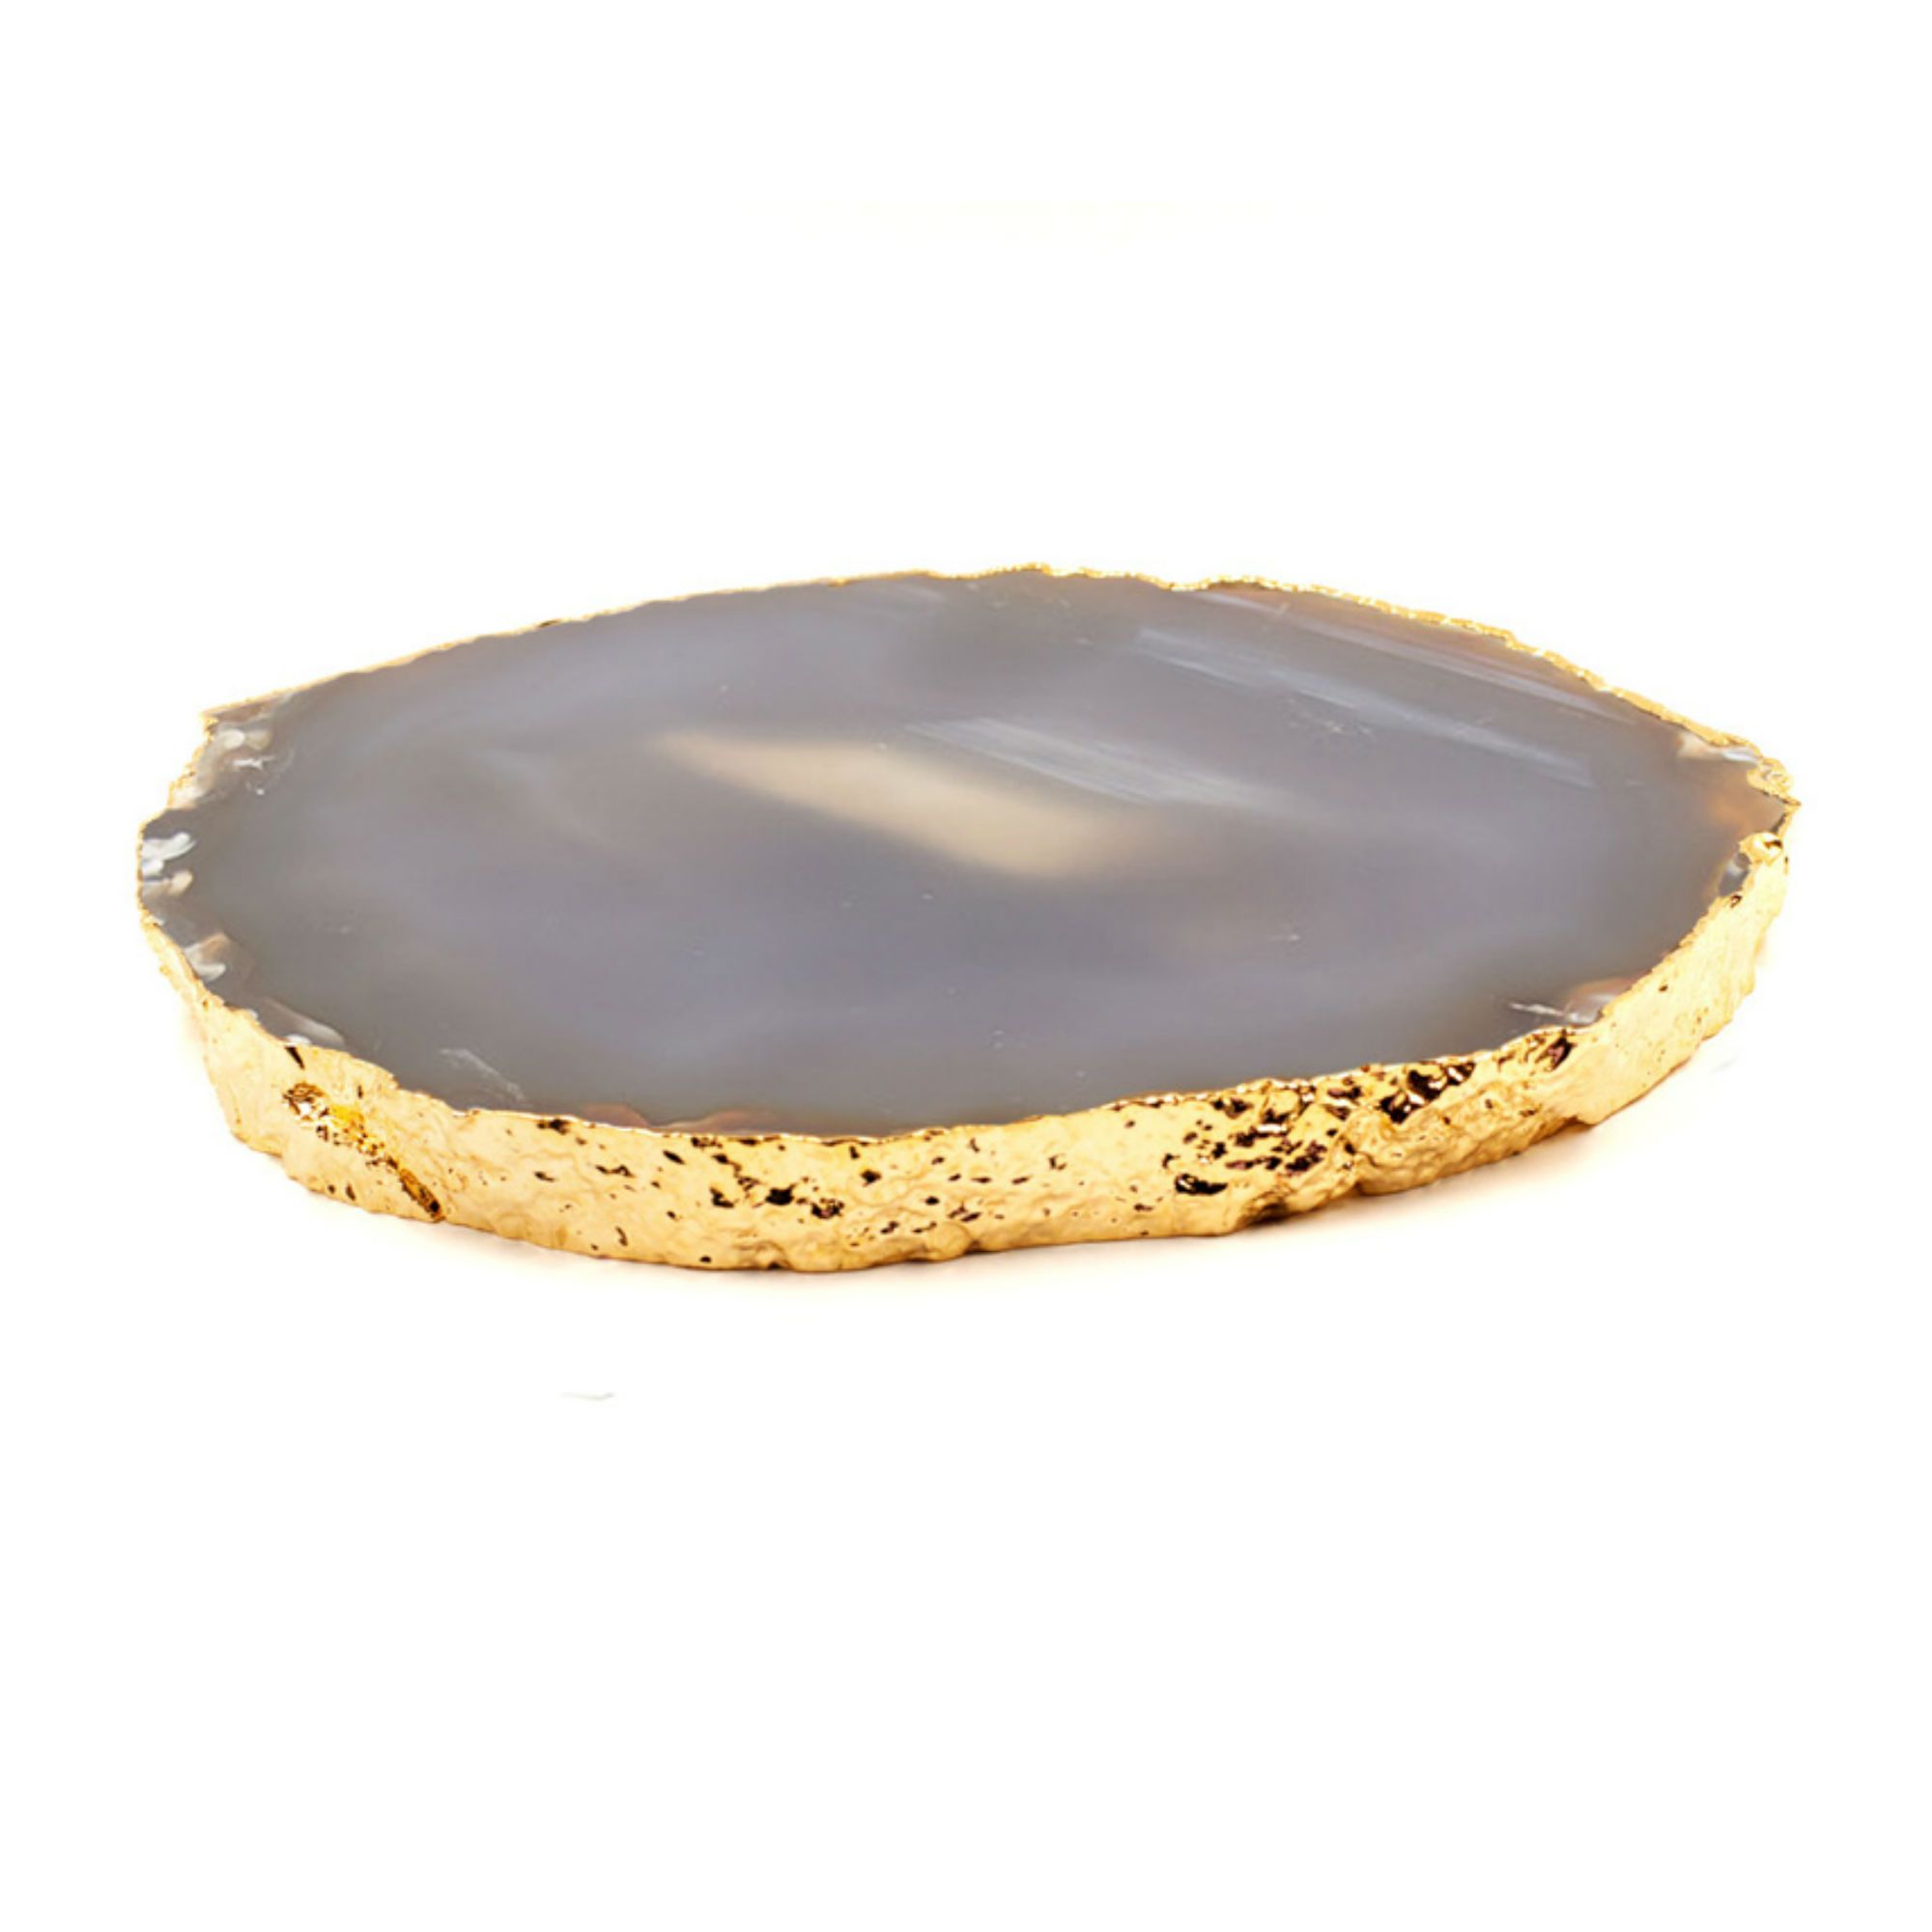 Large Agate Platter with Gold Plated Rim - Natural